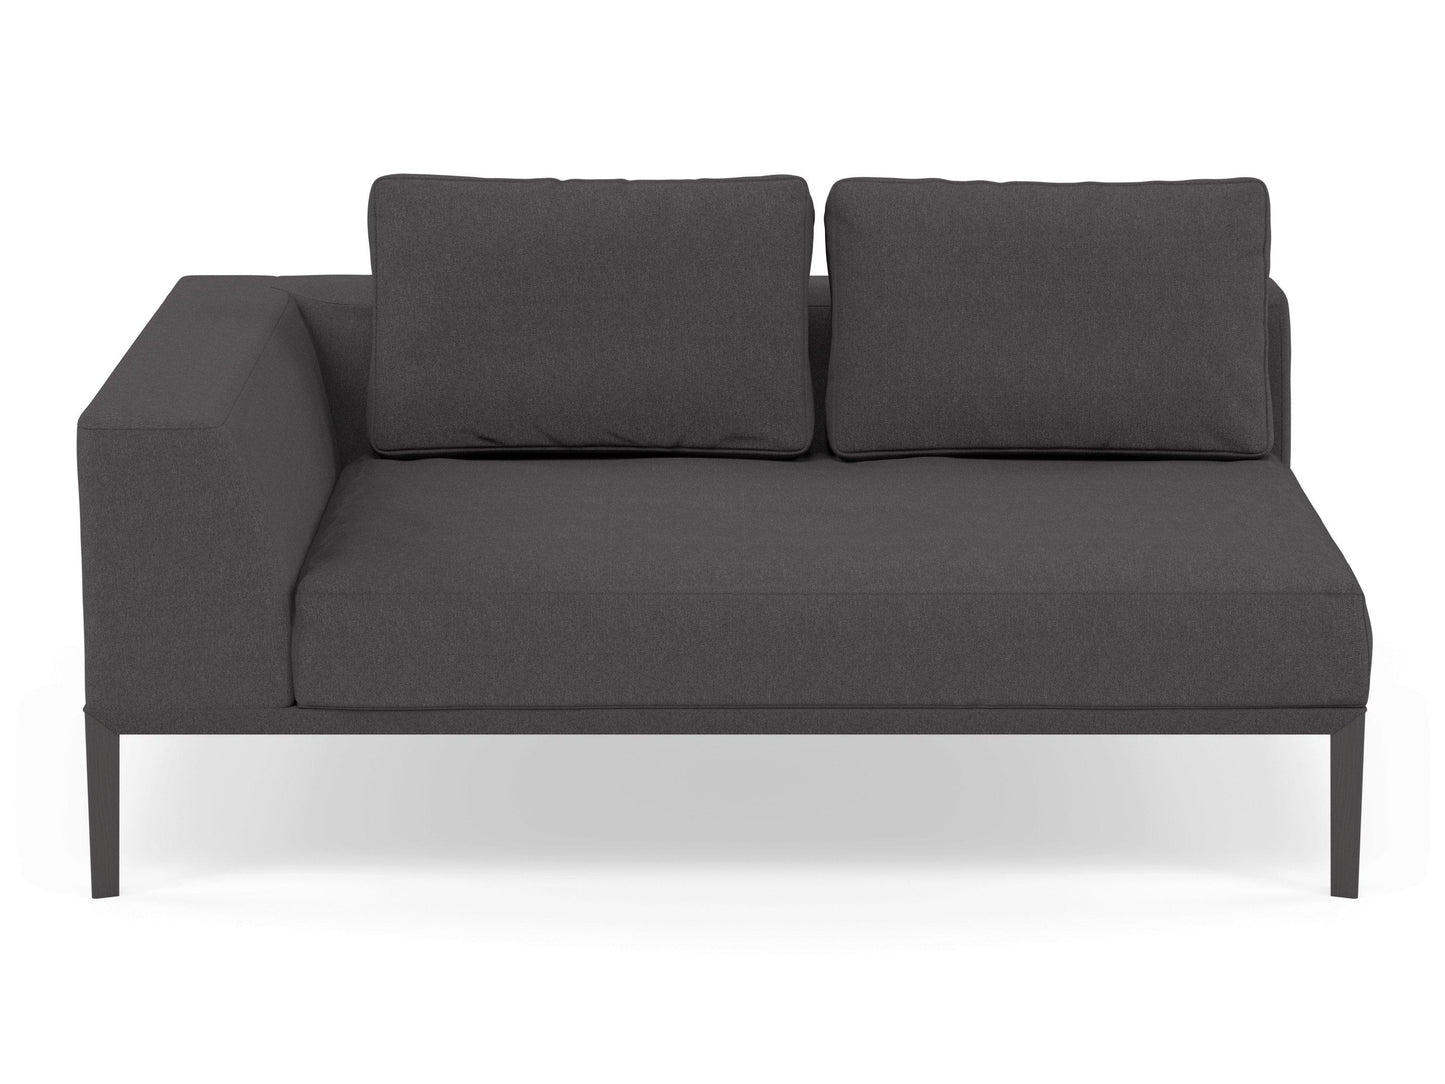 Modern 2 Seater Chaise Lounge Style Sofa with Right Armrest in Slate Grey Fabric-Wenge Oak-Distinct Designs (London) Ltd